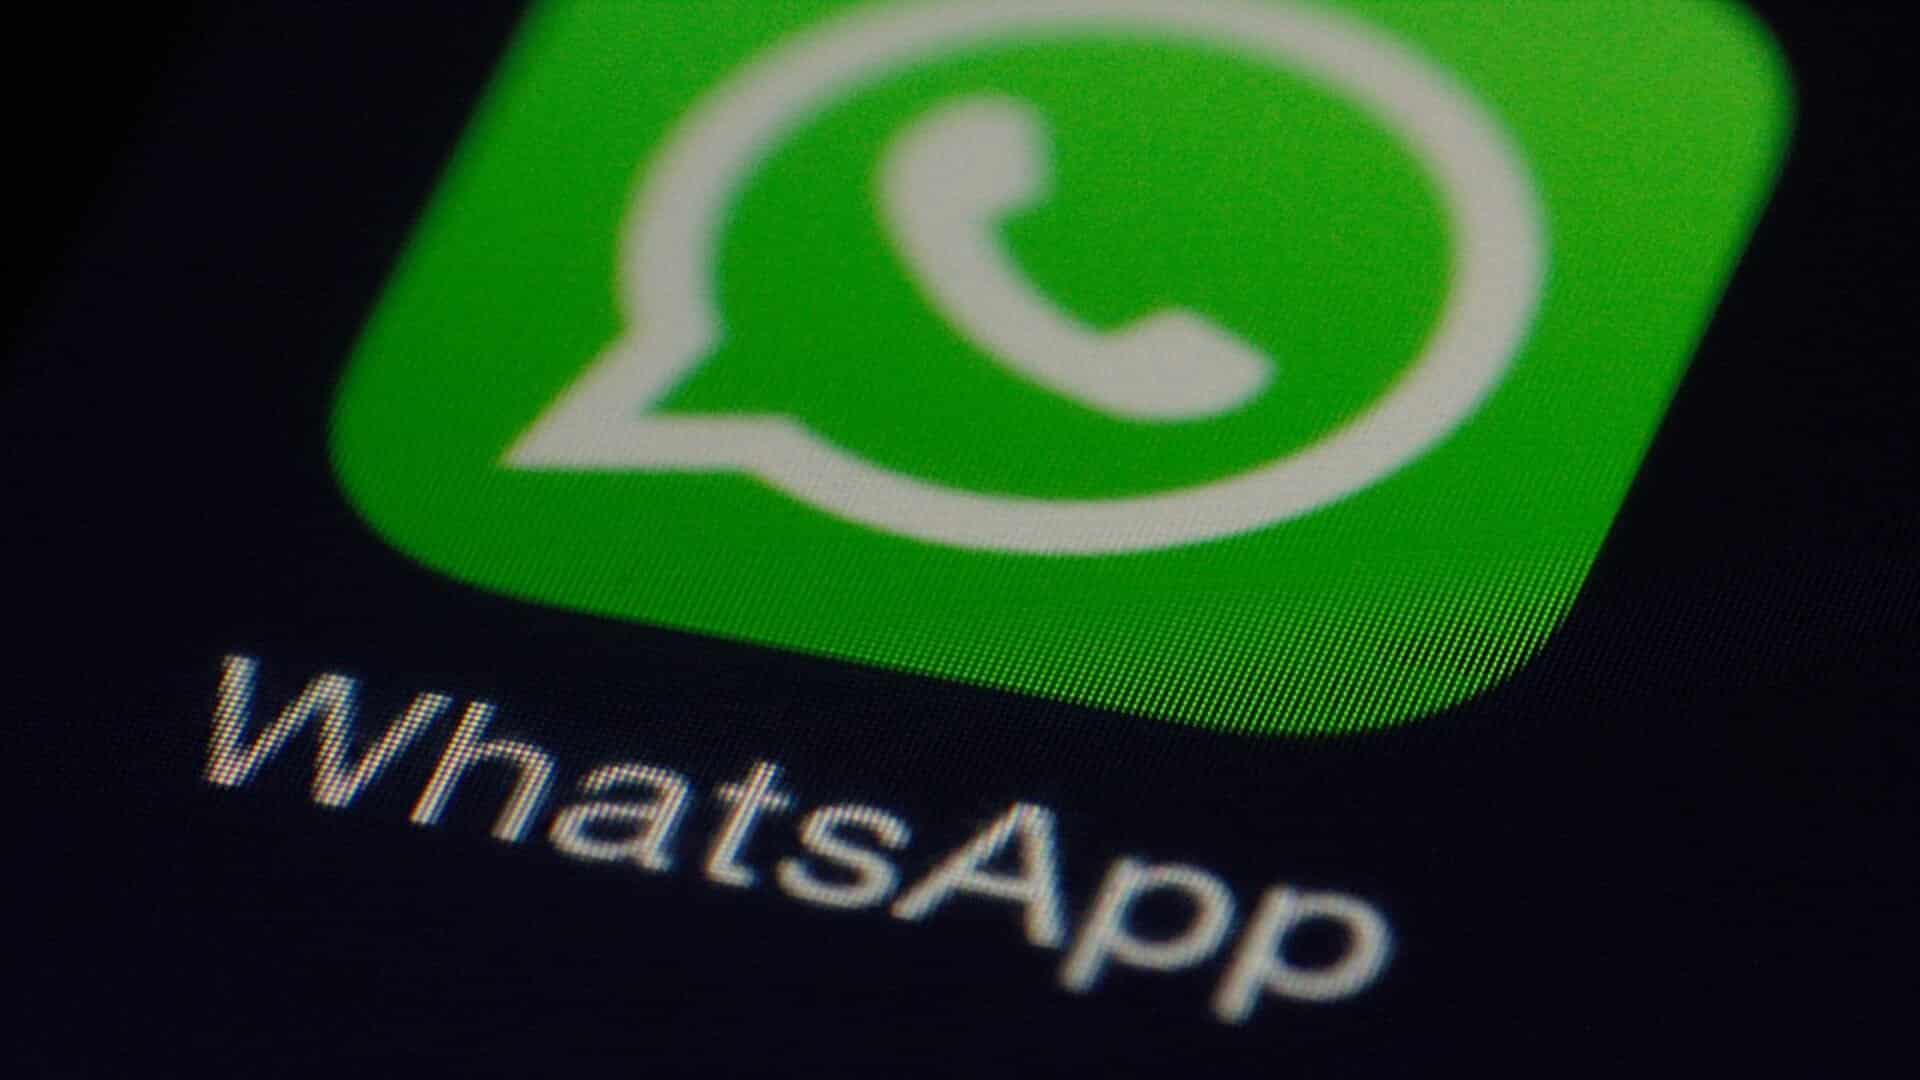 WhatsApp digital payments fails to draw users in India